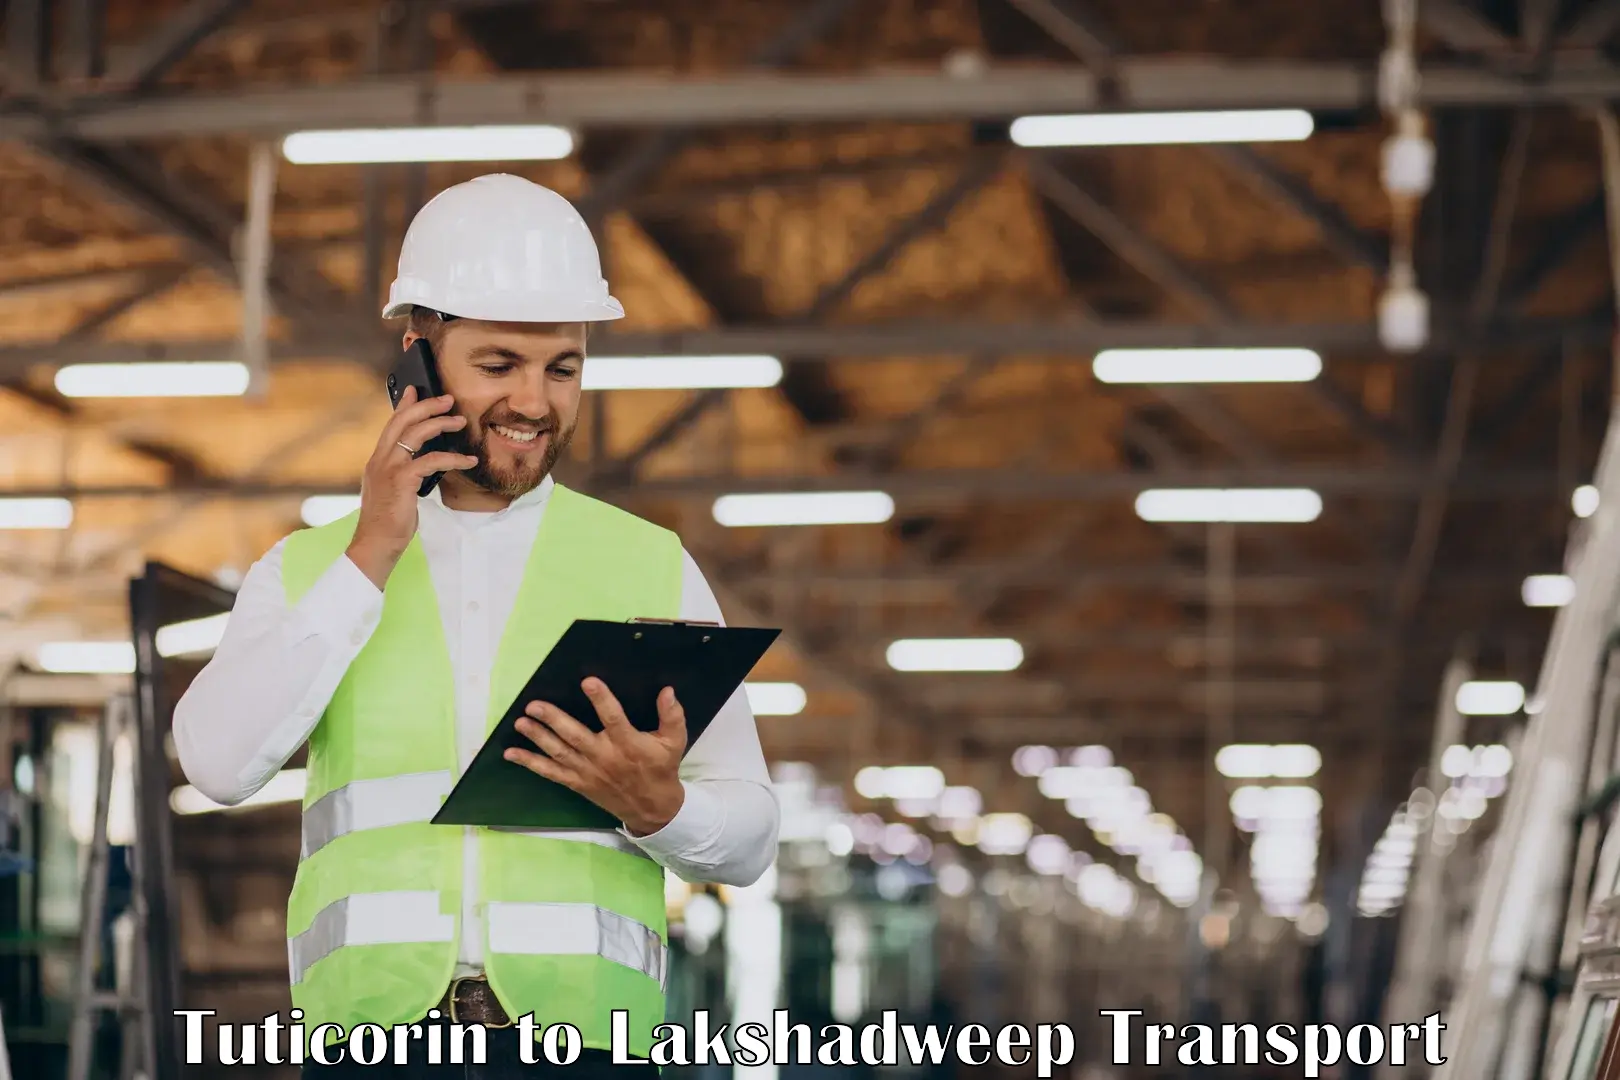 Nationwide transport services Tuticorin to Lakshadweep